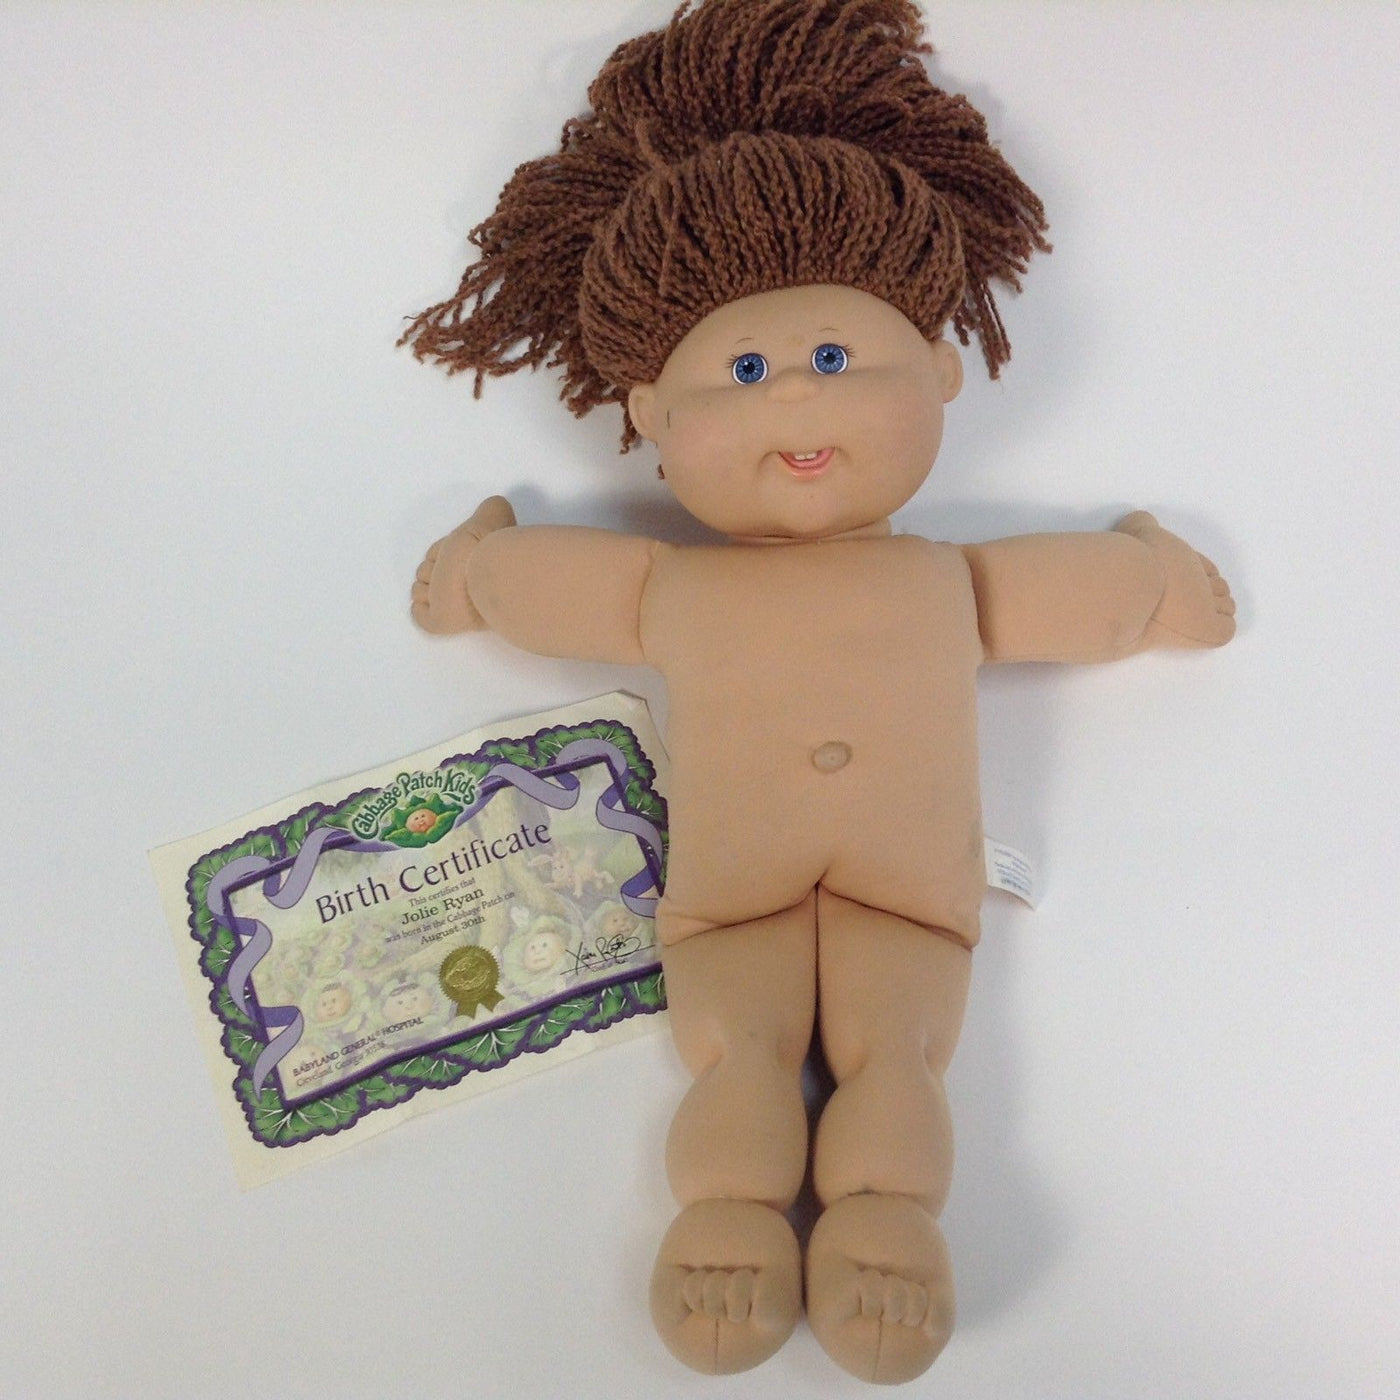 brown haired cabbage patch doll boy